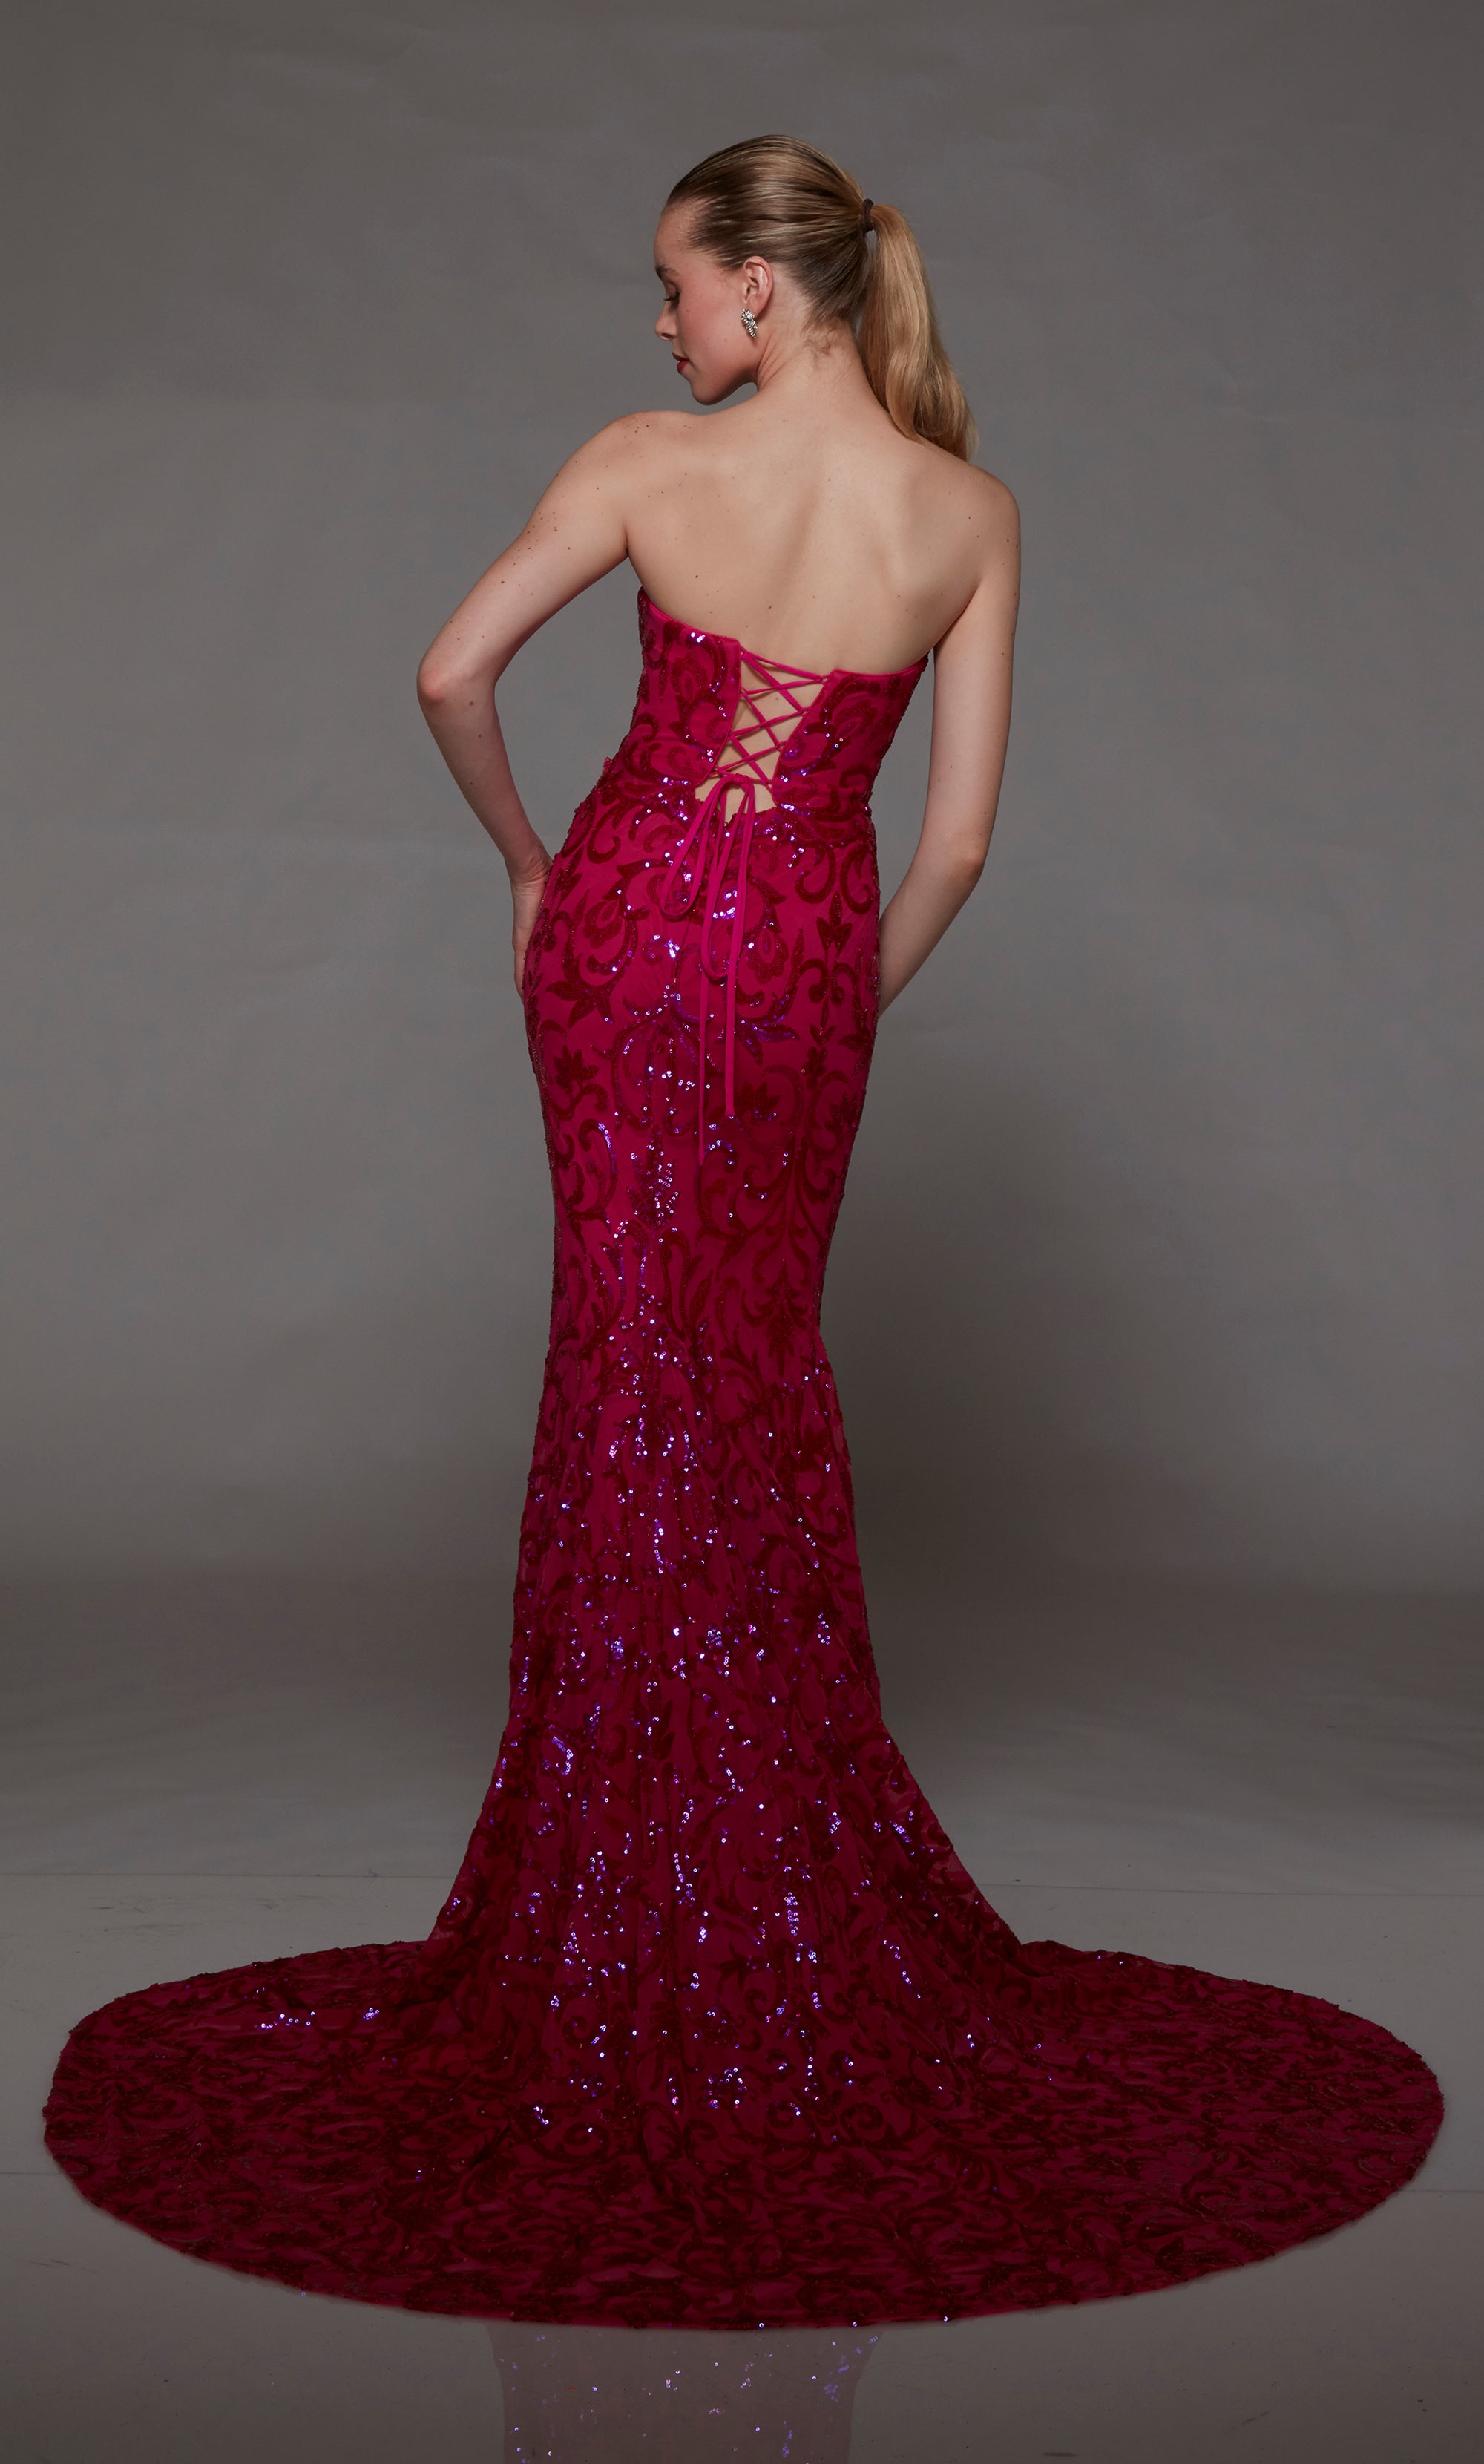 Pink strapless designer dress adorned with delicate sequin embellishments, featuring an lace-up back and an long glamorous train for an truly elegant look.